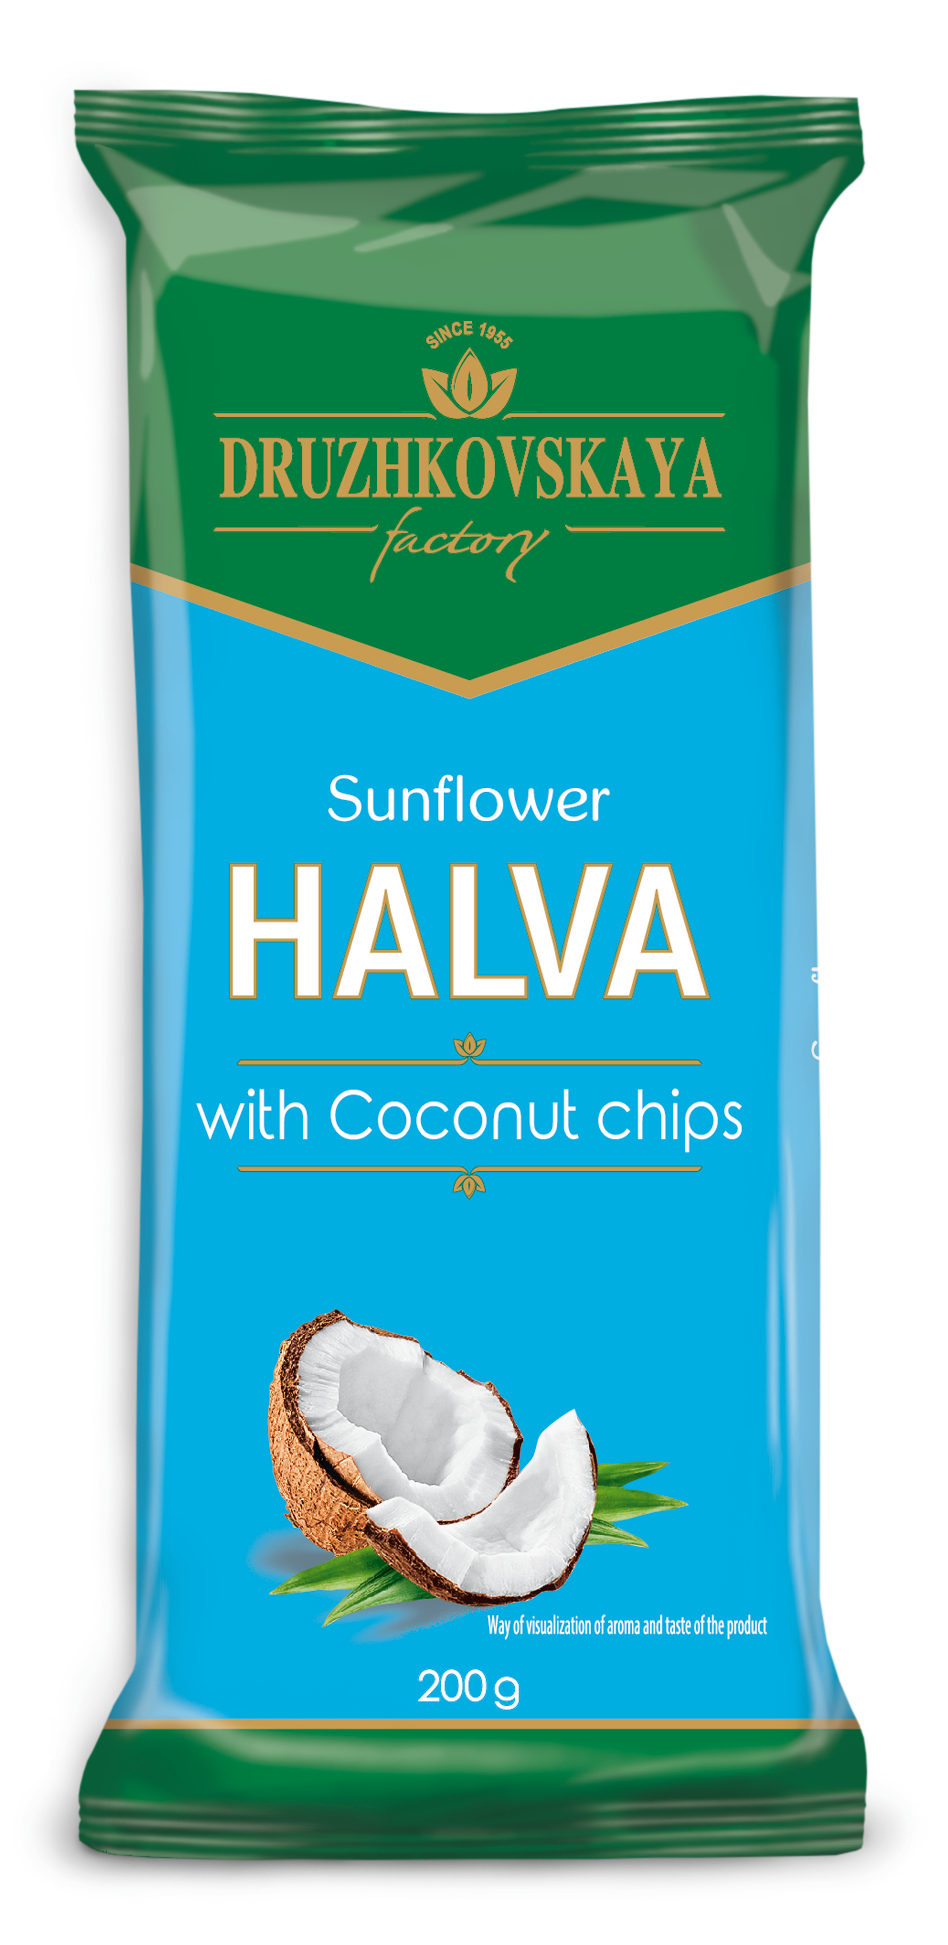 Sunflower Halva with Coconut Chips Packed in Flow-pack, 200 g